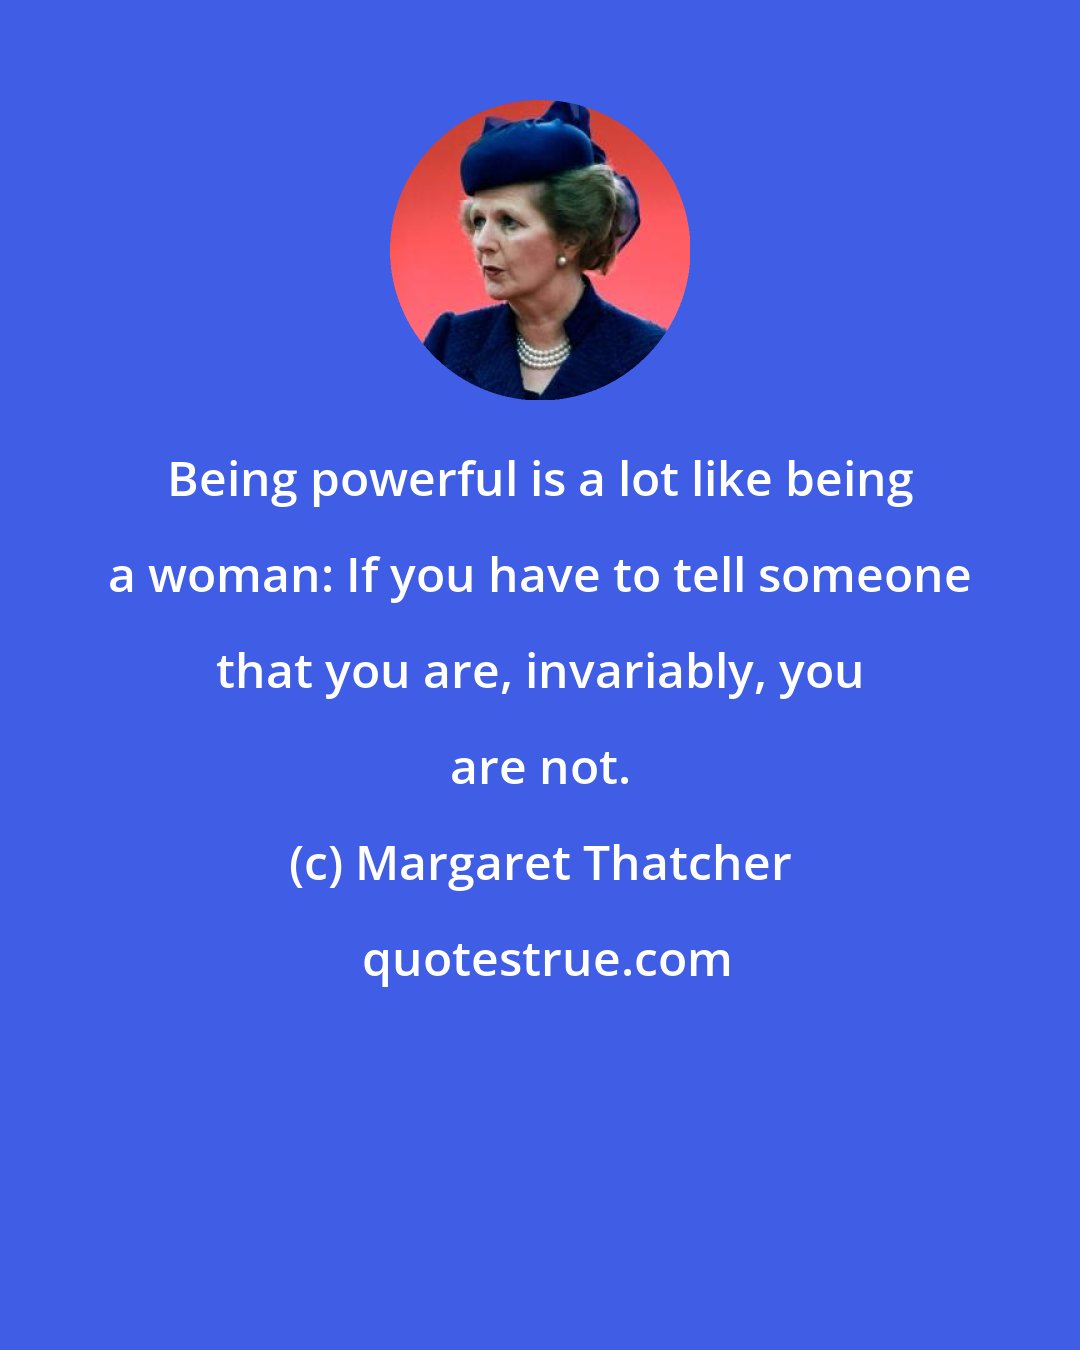 Margaret Thatcher: Being powerful is a lot like being a woman: If you have to tell someone that you are, invariably, you are not.